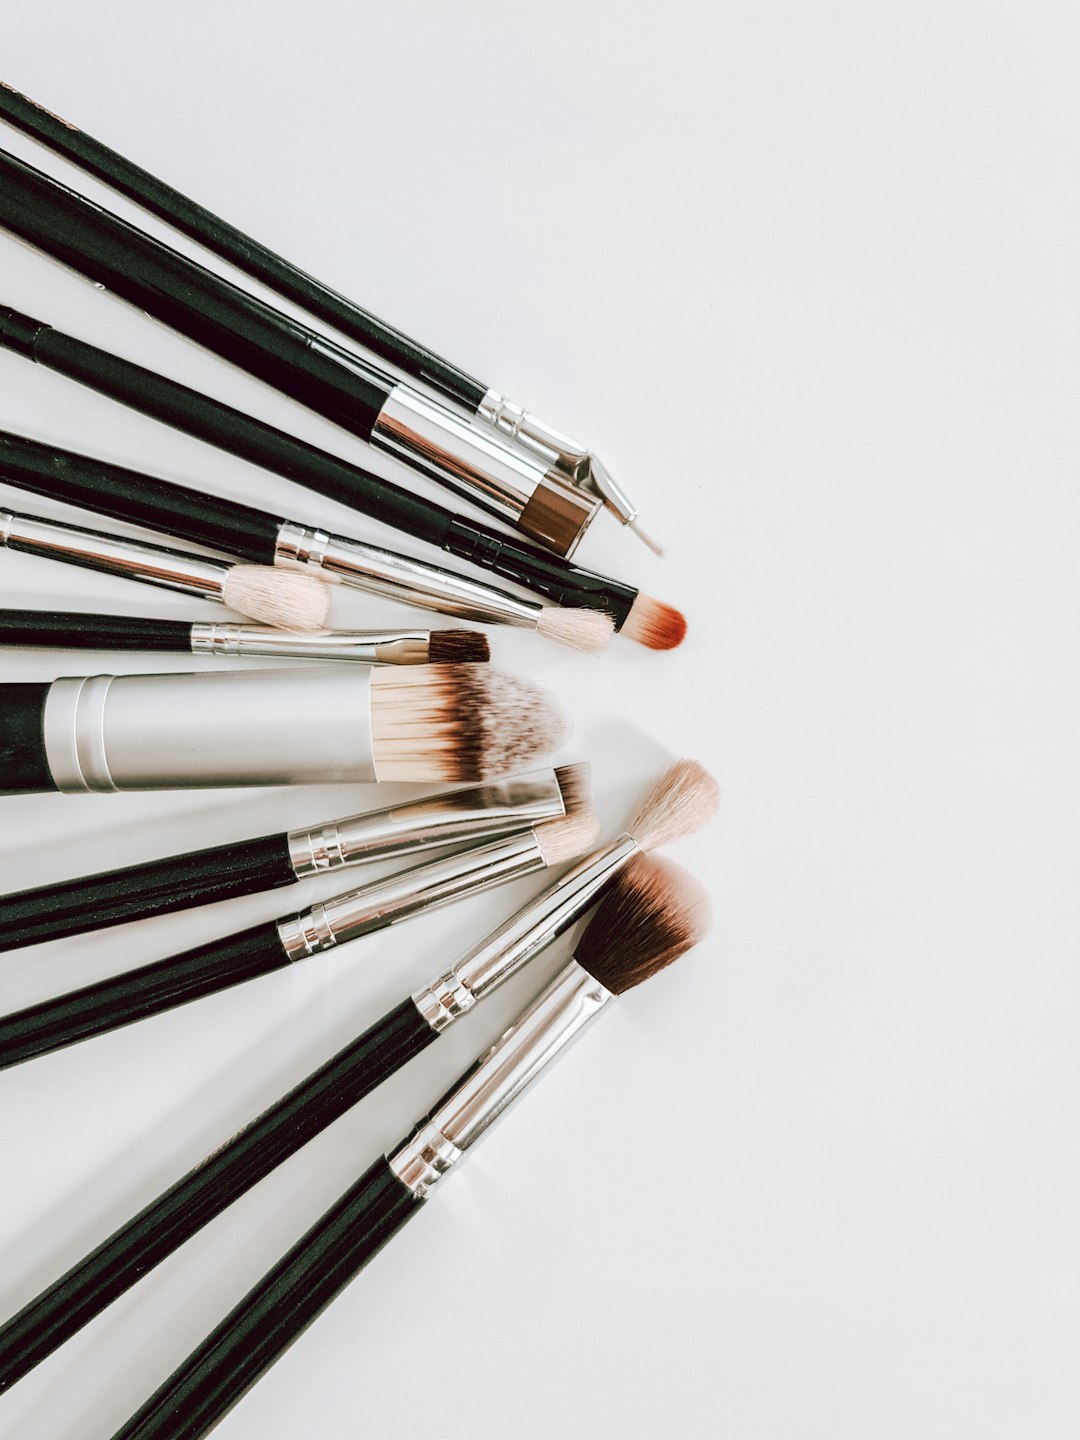 Growing your Makeup Artistry Skills with Short Makeup Courses Online